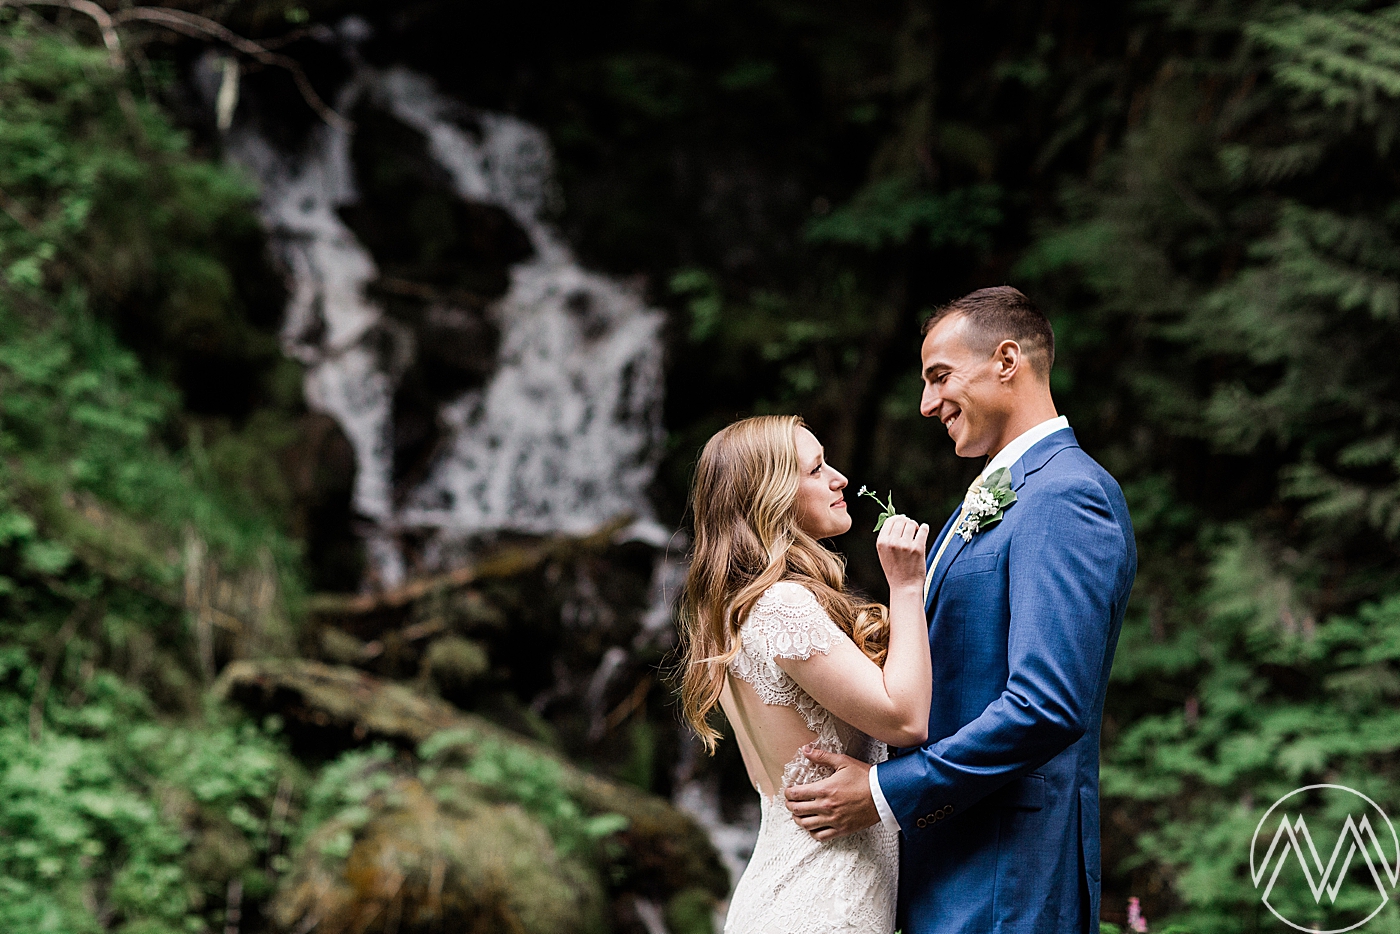 Bride and Groom First Look at Intimate Mt. Rainier Elopement. Photographed by Adventure Elopement Photographer, Megan Montalvo Photography. 